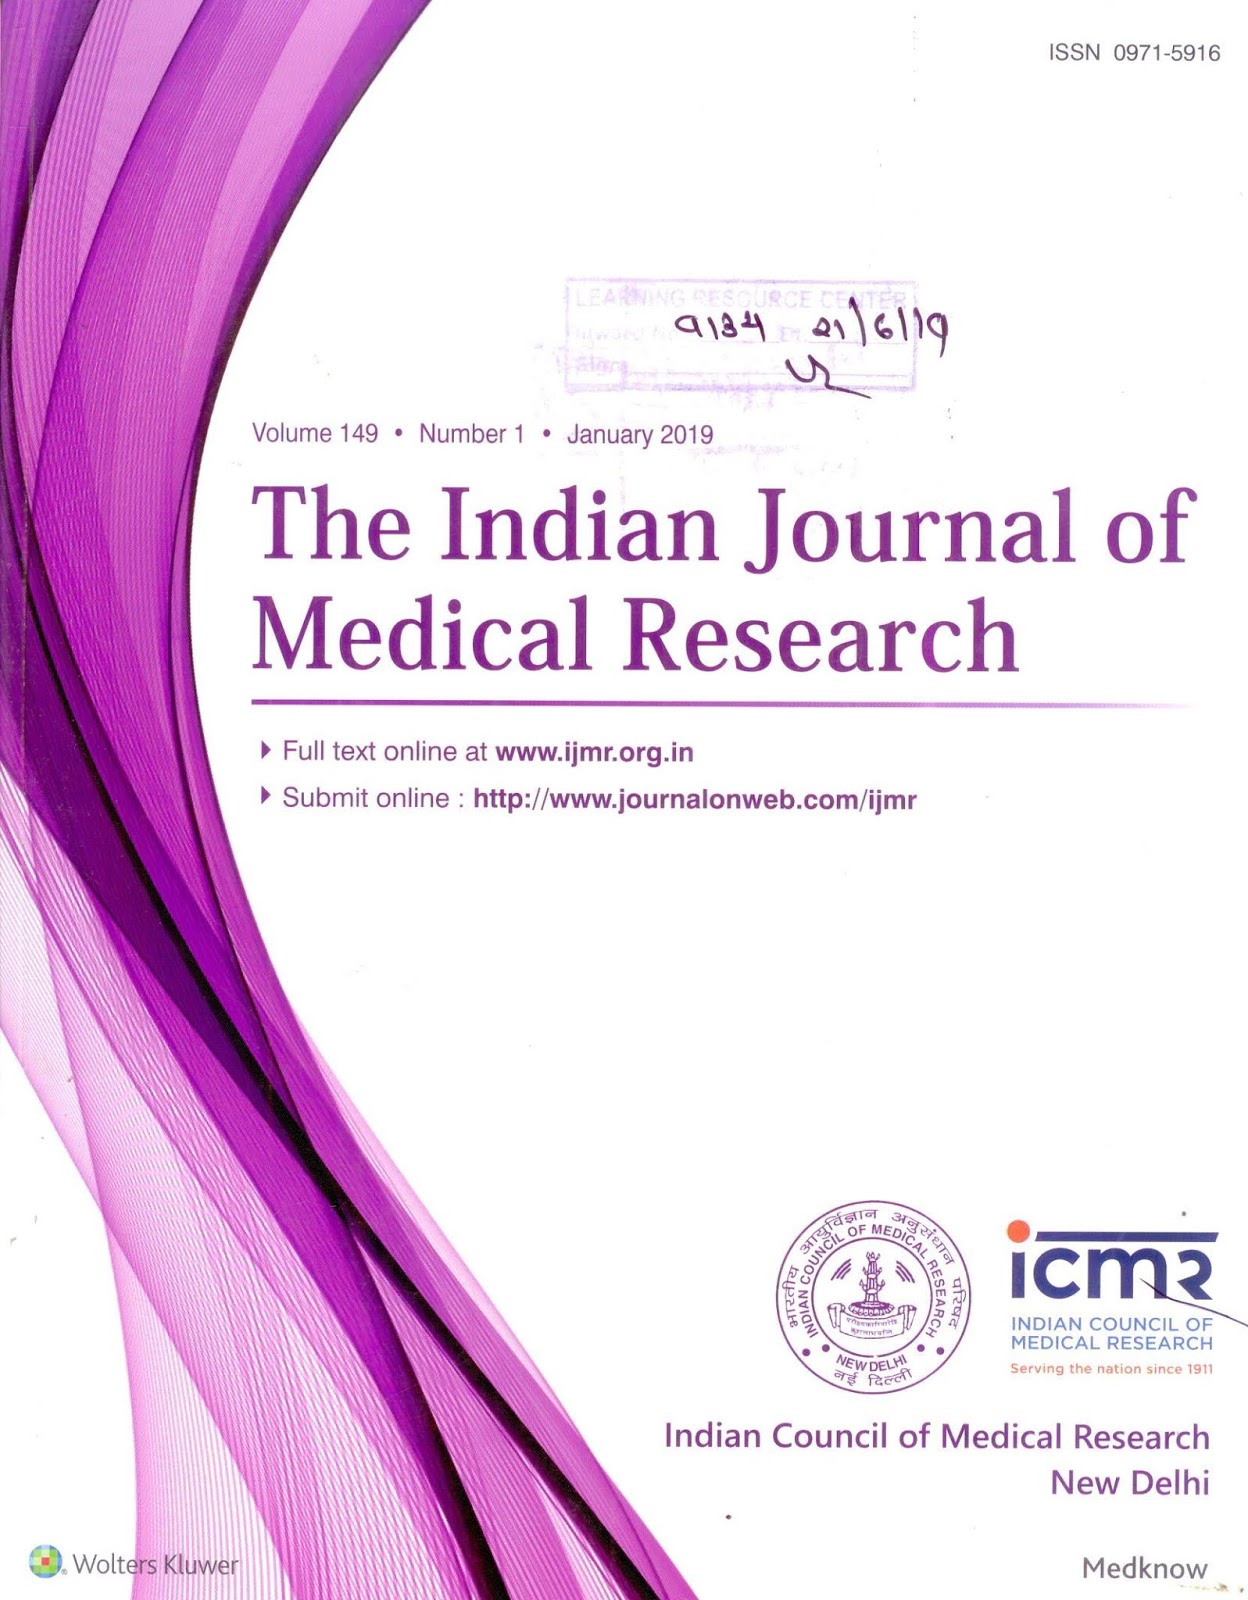 http://www.ijmr.org.in/showBackIssue.asp?issn=0971-5916;year=2019;volume=149;issue=1;month=January